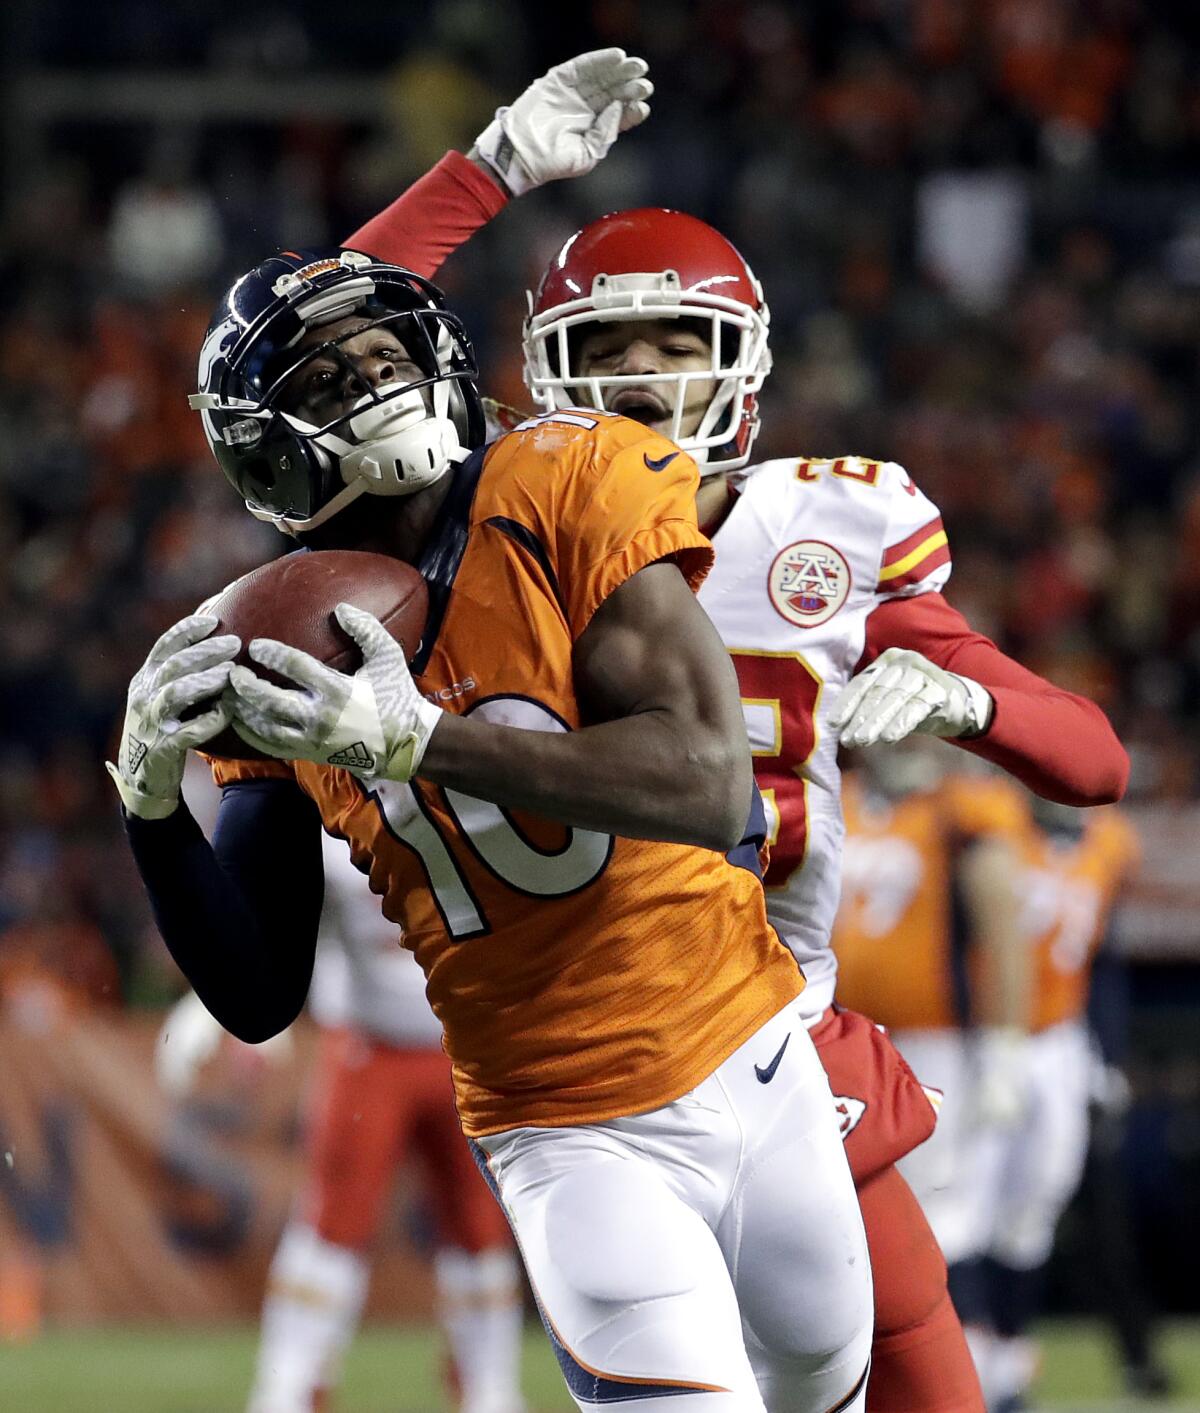 FILE - Denver Broncos wide receiver Emmanuel Sanders (10) pulls in a touchdown pass as Kansas City Chiefs cornerback Phillip Gaines defends during the second half of an NFL football game, Sunday, Nov. 27, 2016, in Denver. Sanders announced his retirement Wednesday, Sept. 7, 2022, after a 12-year NFL career that included six season in Denver, where he helped the Broncos win Super Bowl 50. (AP Photo/Jack Dempsey, File)